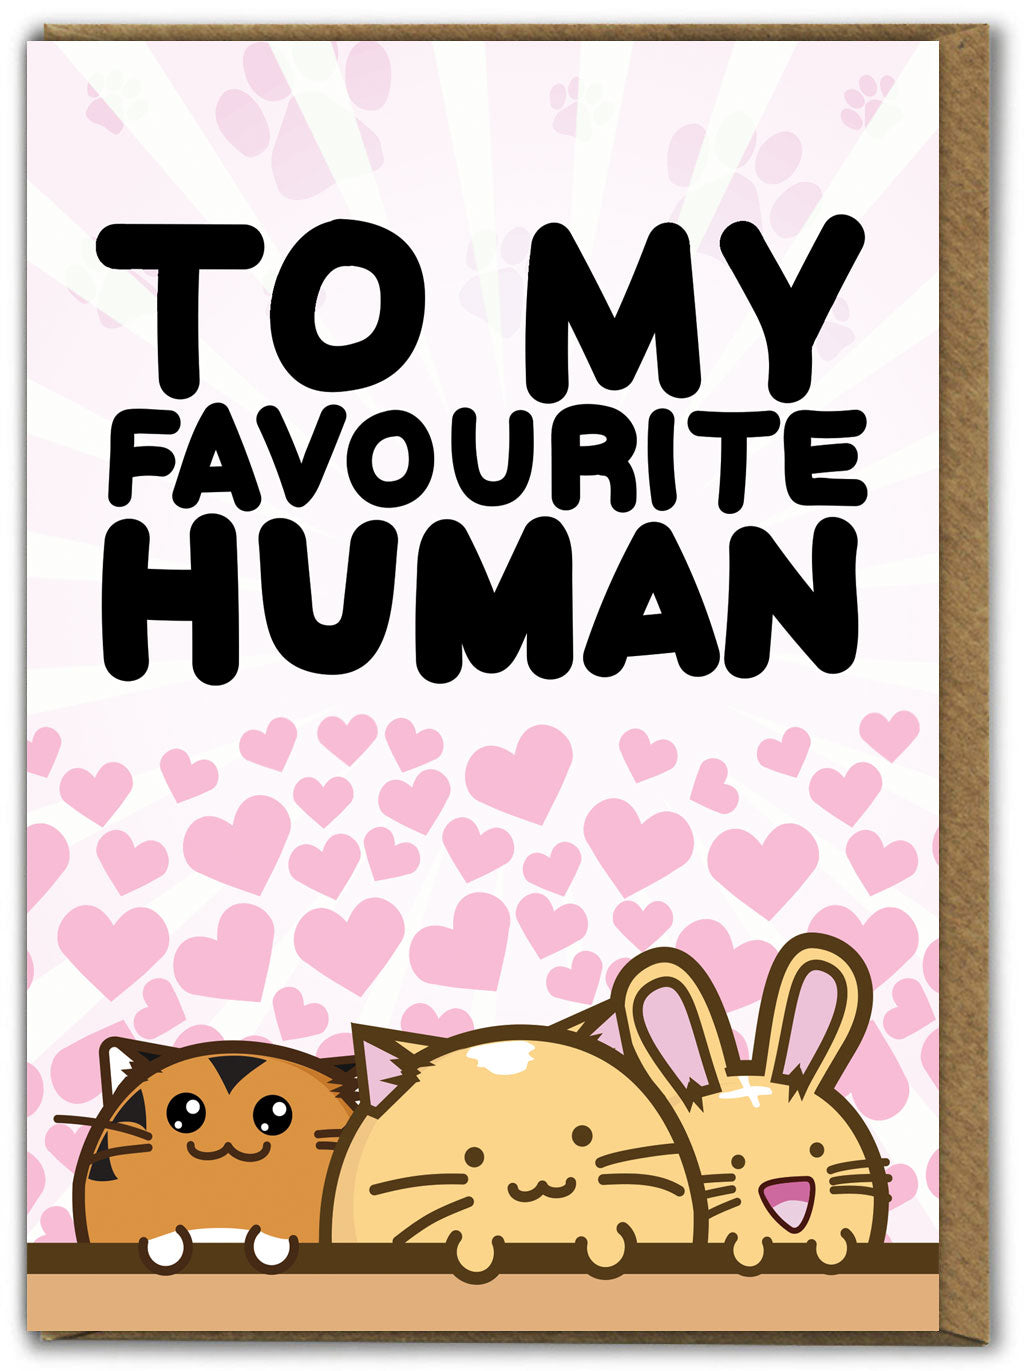 A greetings card with a white background and light pink sunrays at the top behind big black words in capitals &#39;to my favourite human&#39;. The illustration below is of very cute animals in a kawaii style - two cats and a rabbit. They are surrounded by light pink hearts.